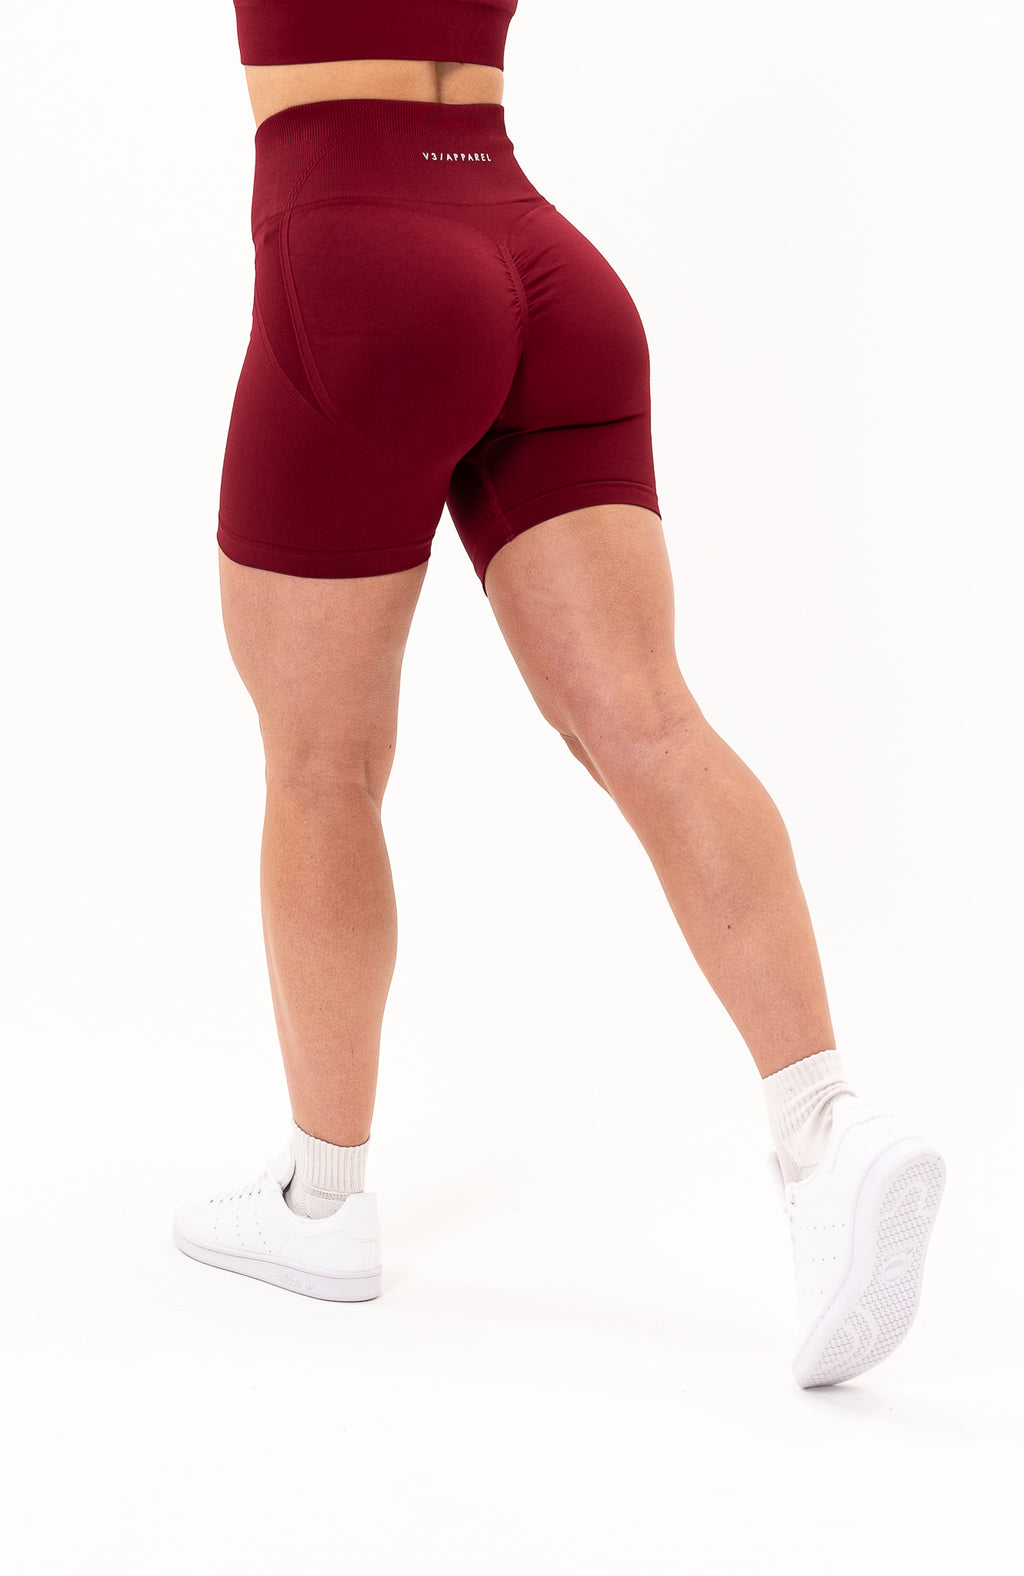 Stay comfortable and stylish with Alphalete Seamless Biker Shorts